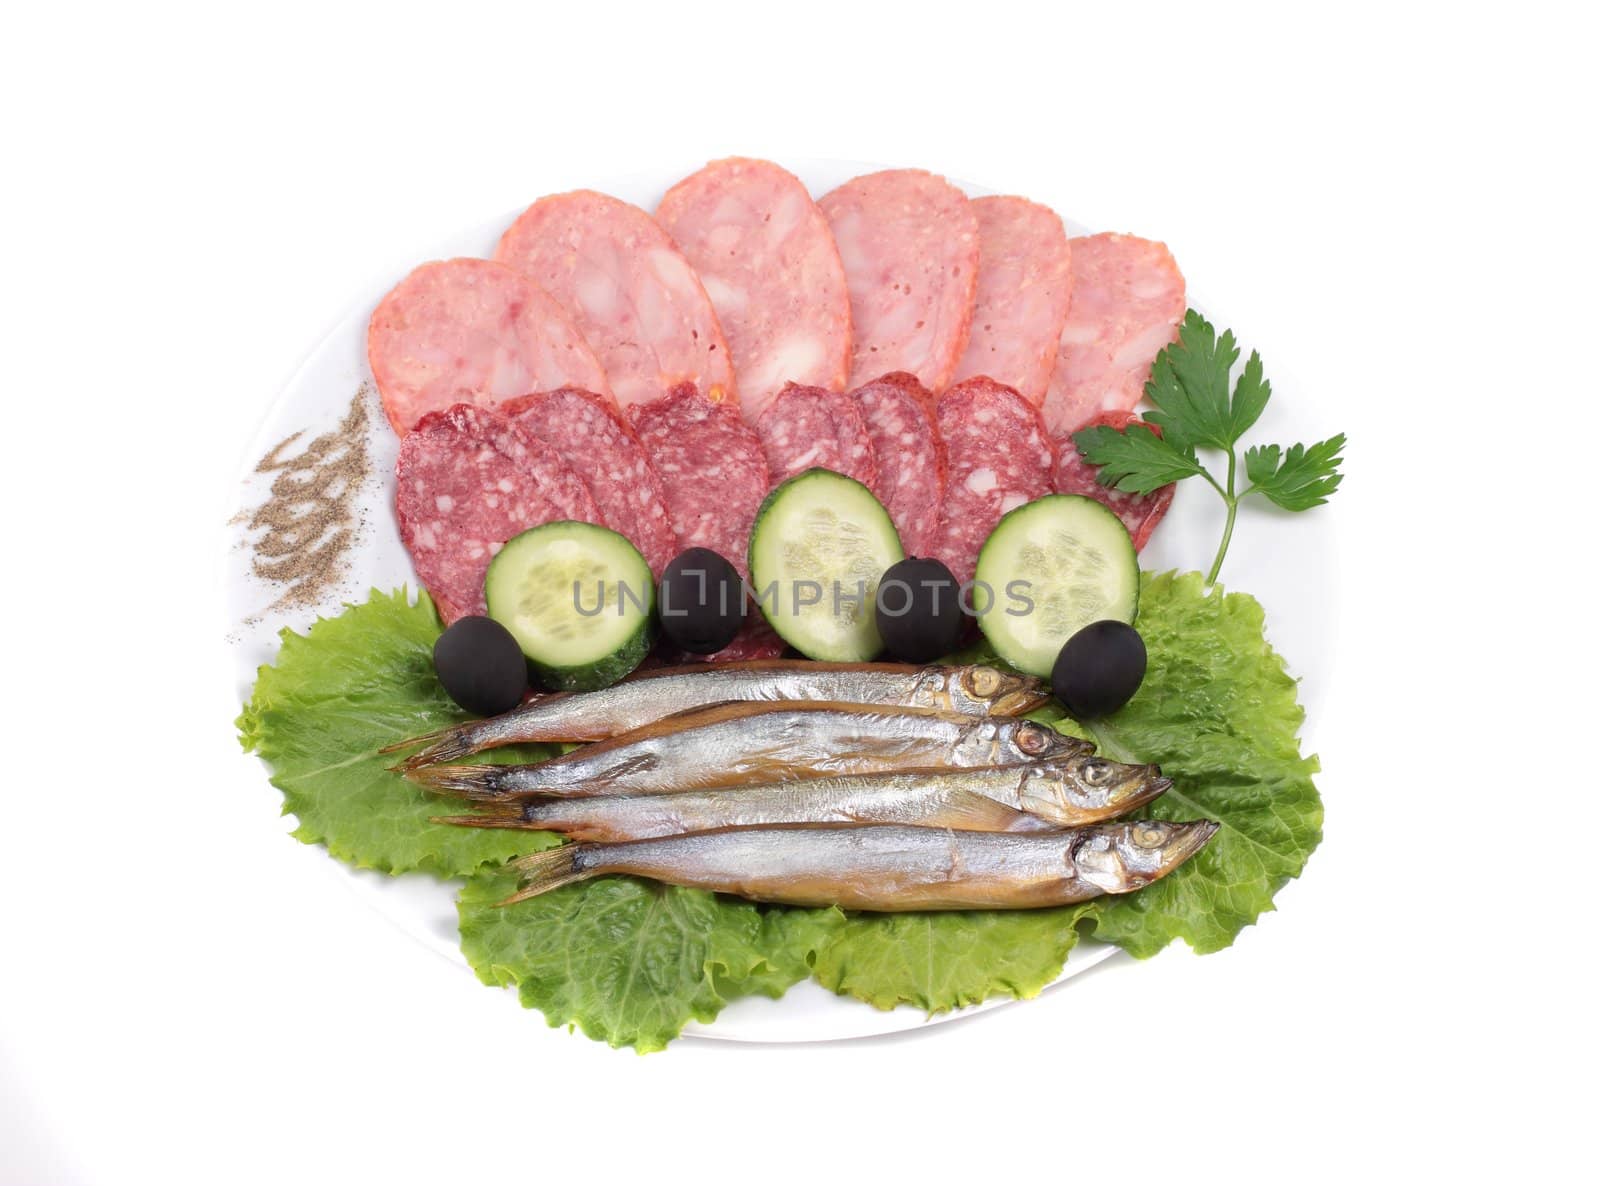 meat and fish on plate isolated on white